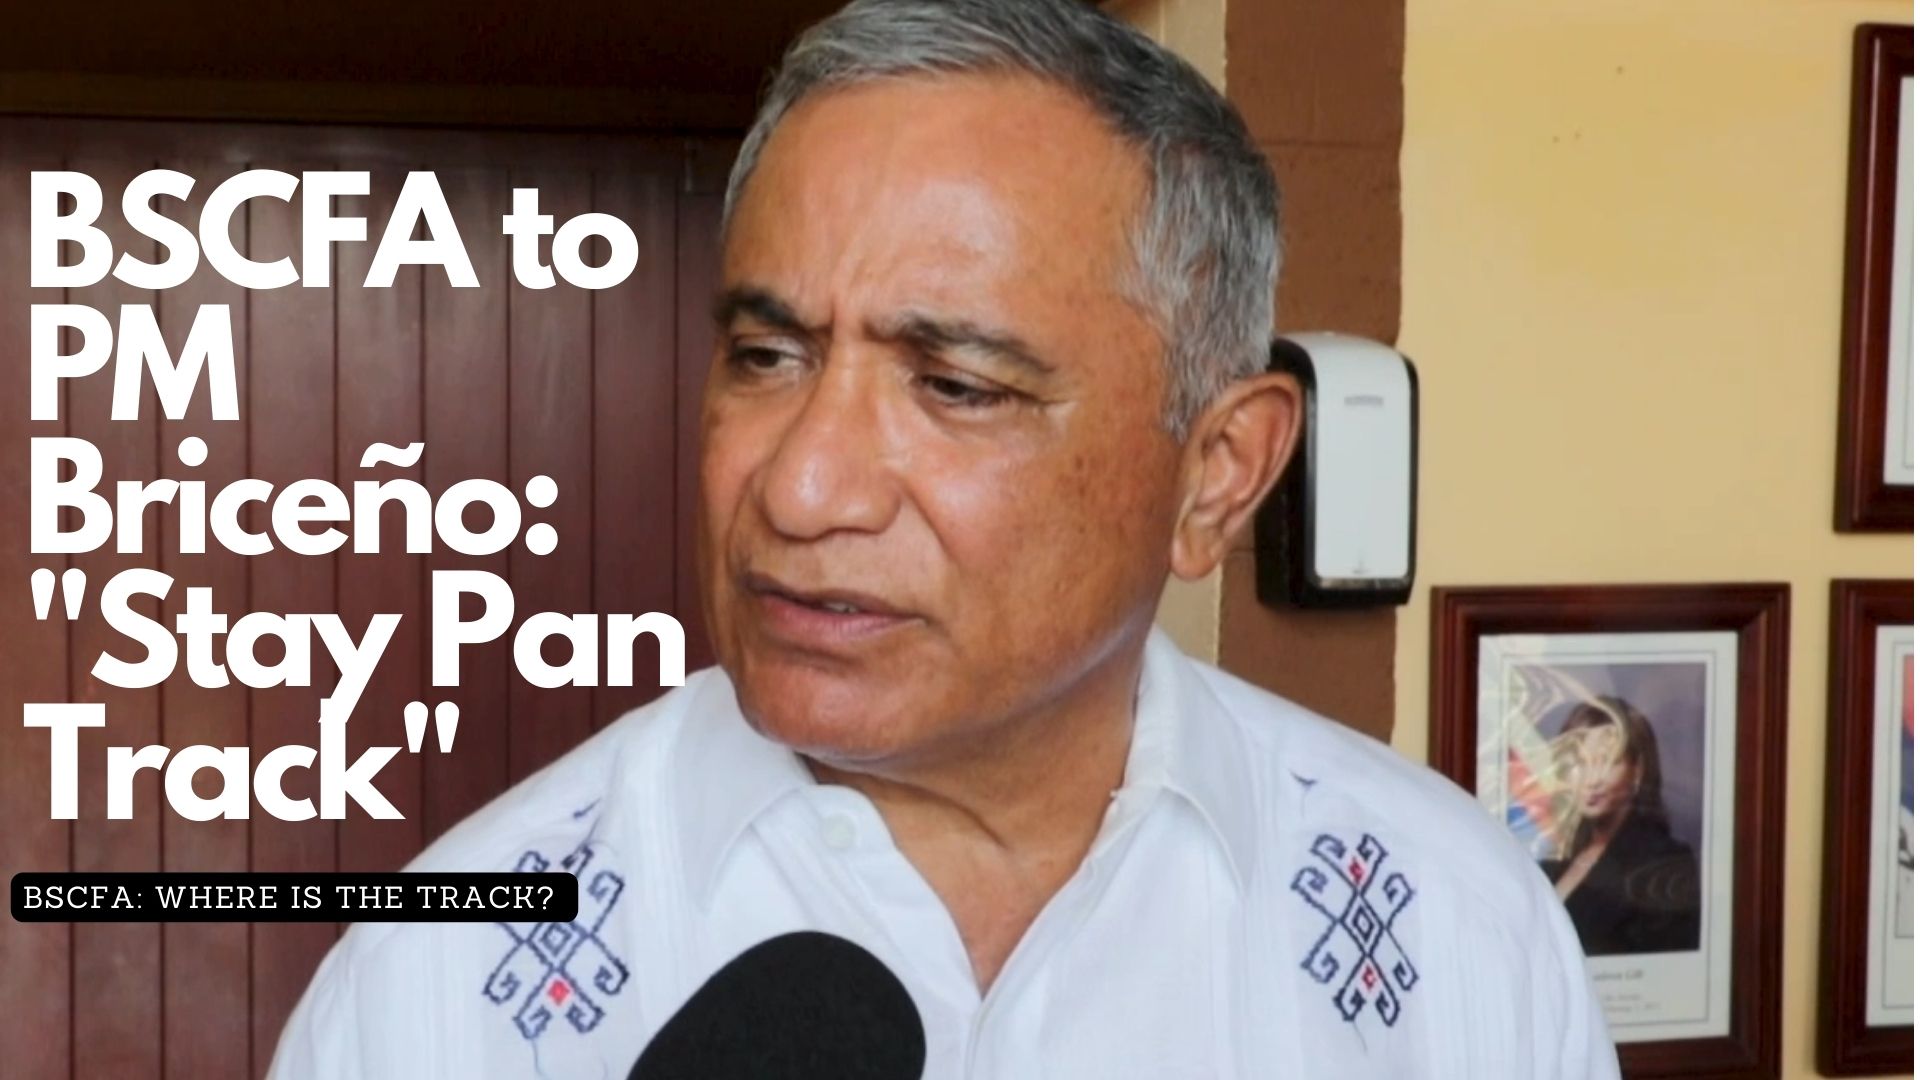 BSCFA to PM Briceño: "Stay Pan Track" 